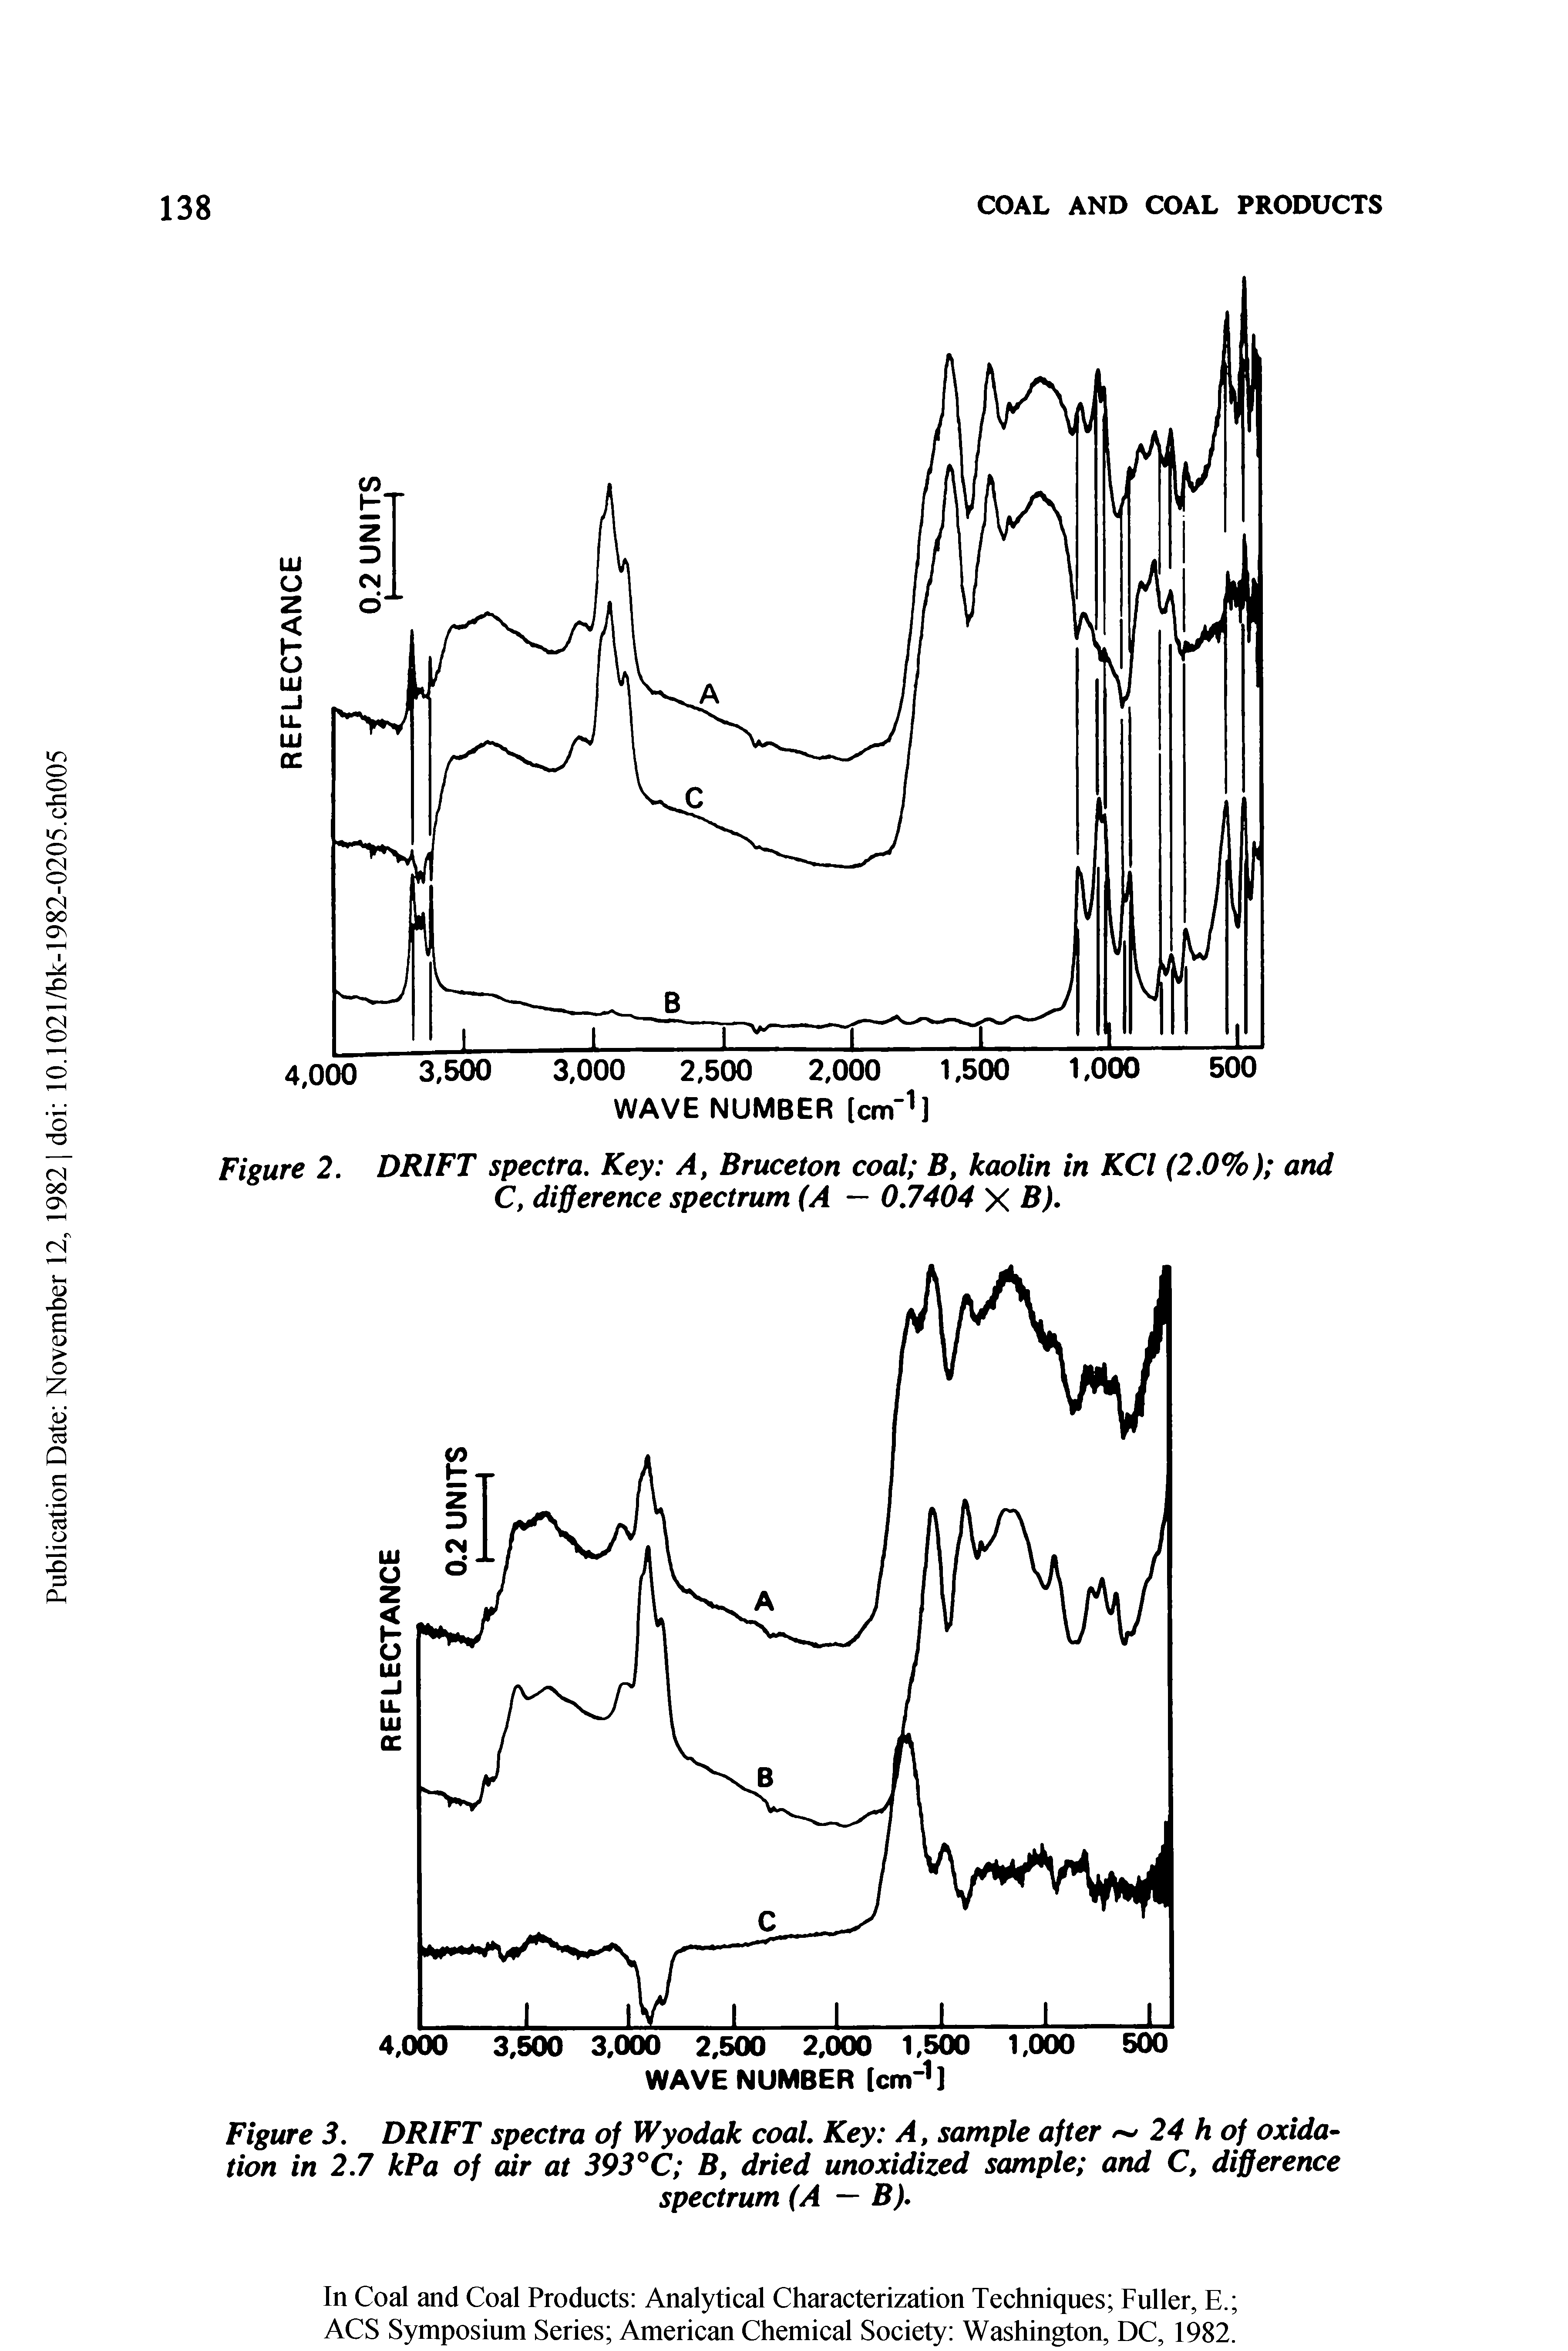 Figure 2. DRIFT spectra. Key A, Bruceton coal B, kaolin in KCl (2.0%) and C, difference spectrum (A — 0,7404 y B).